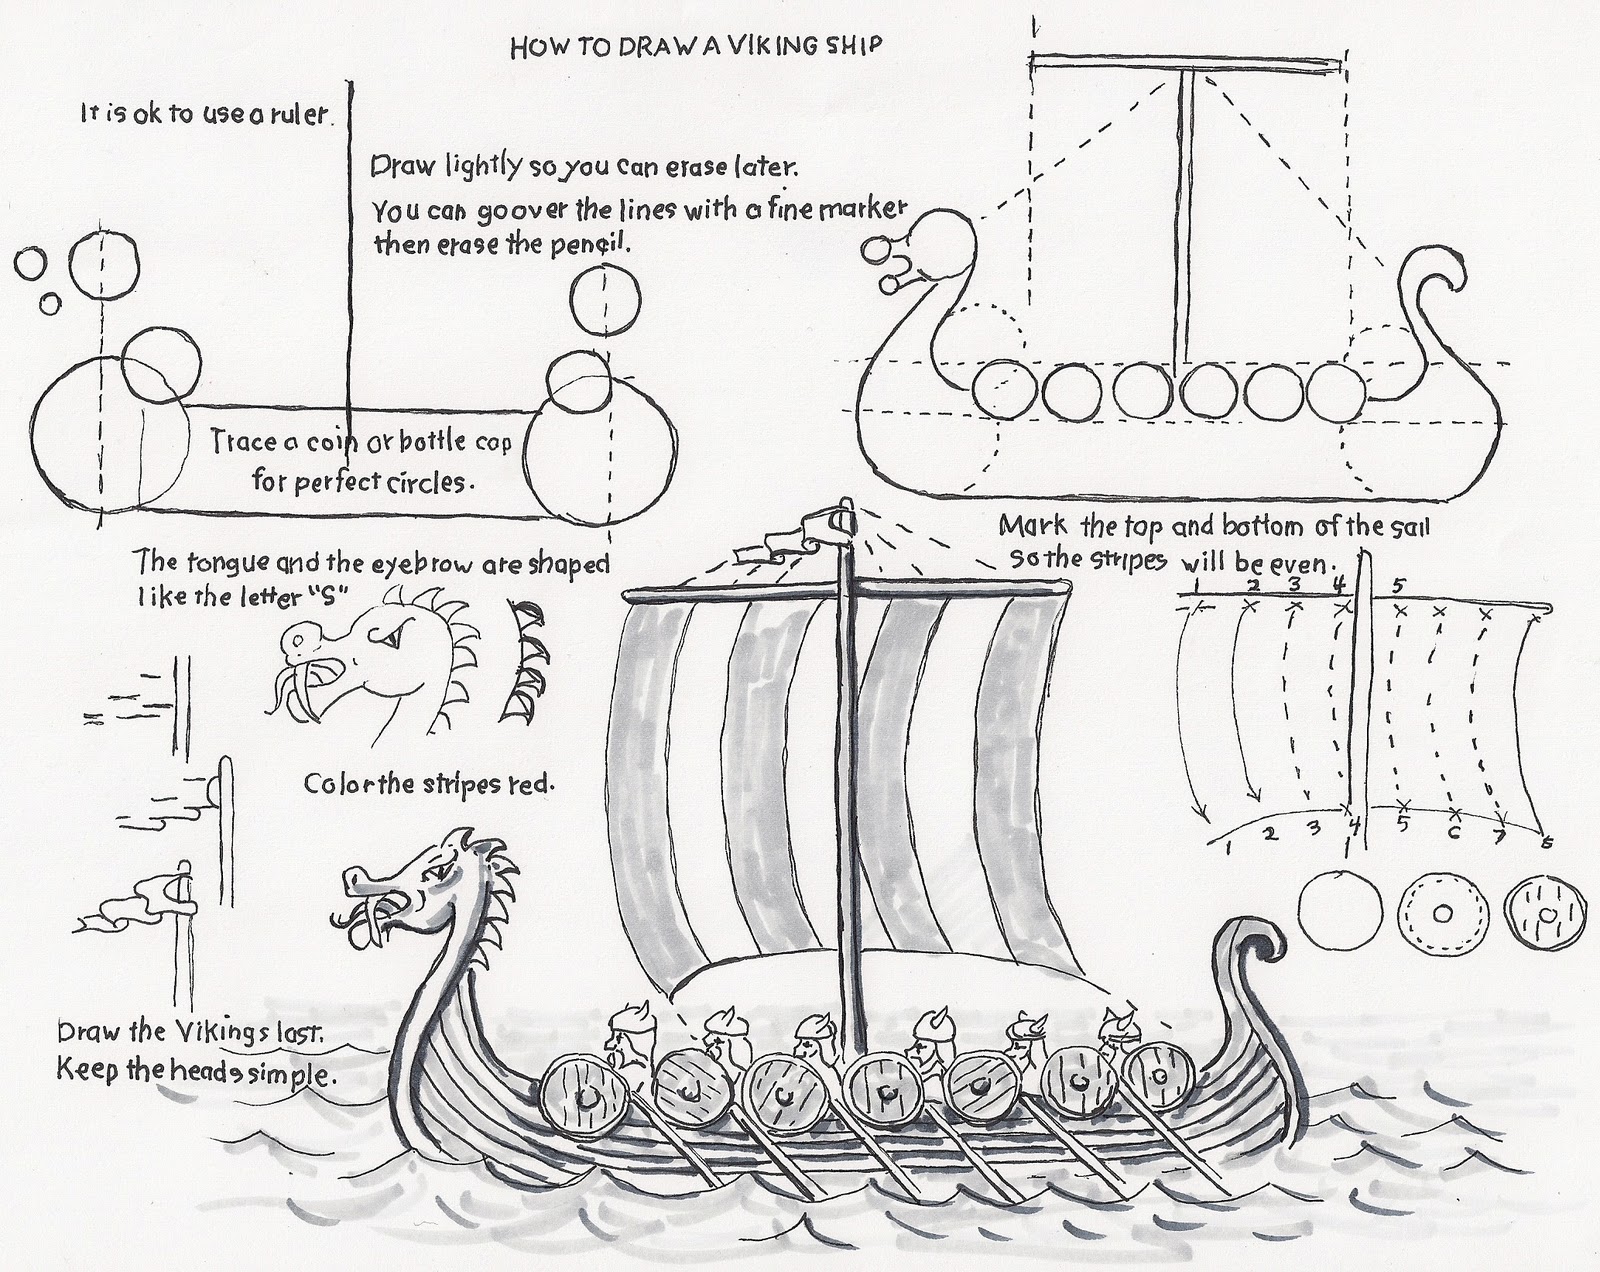  Artist: How to Draw a Viking Ship, a lesson for the Young Artist